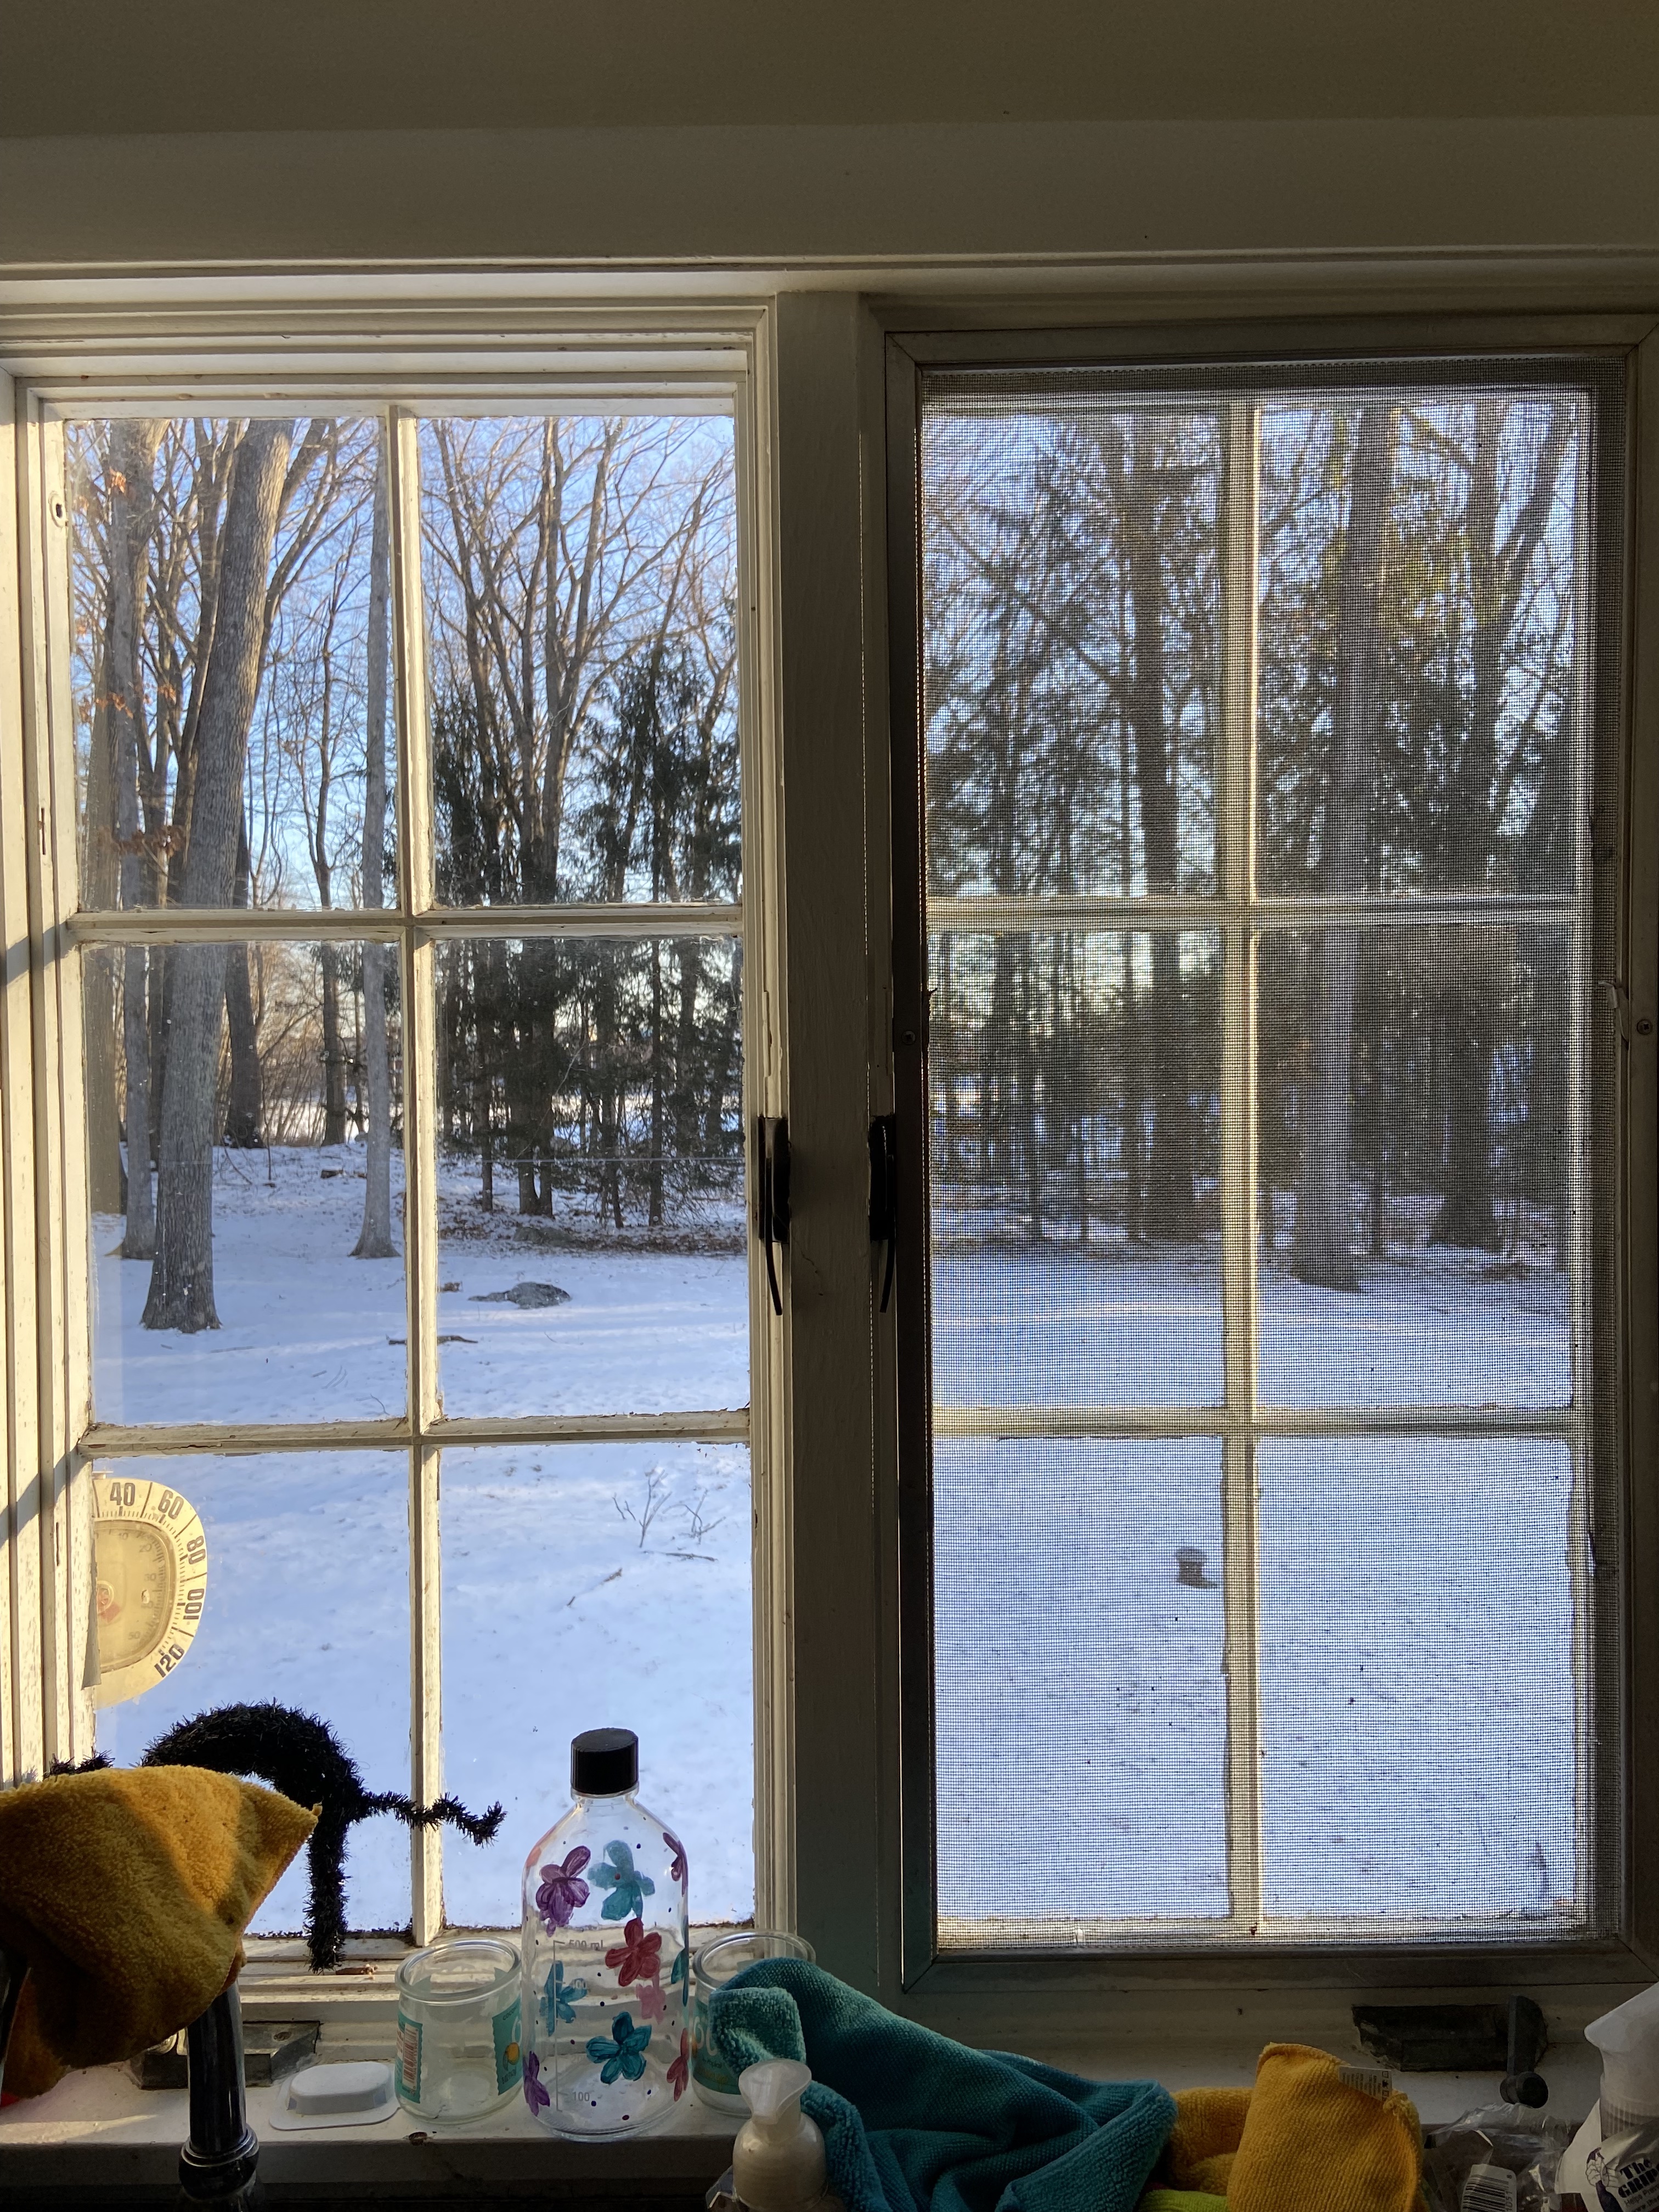 This is an image of the backyard as seen through the kitchen window. The view out the window is of a snowy landscape. 